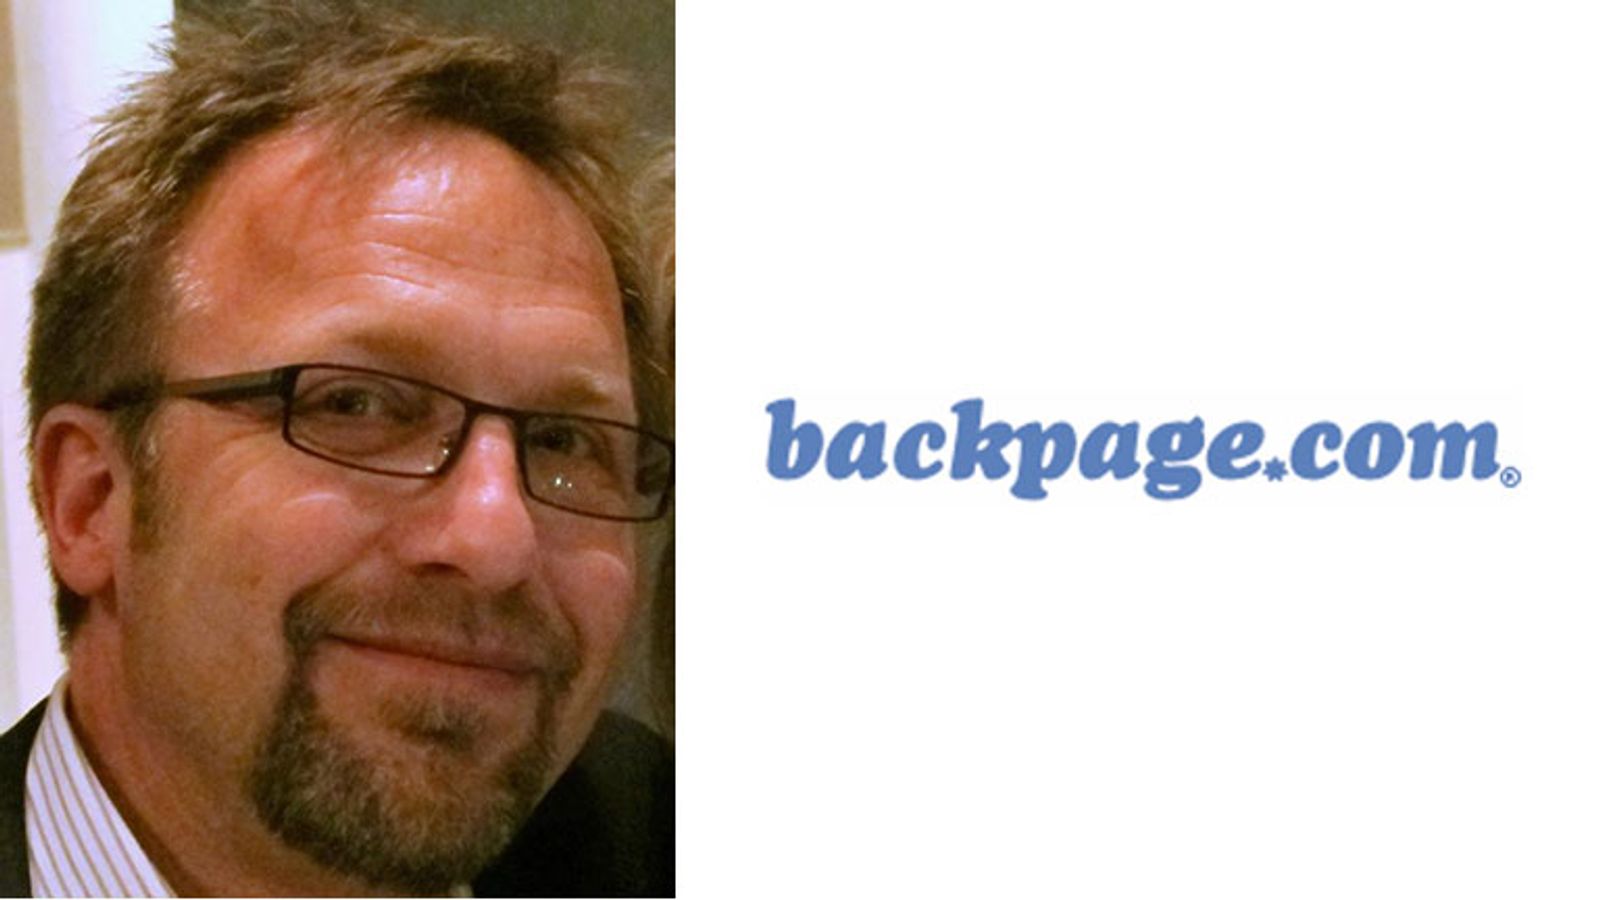 Backpage.com CEO Arrested for Pimping and Conspiracy